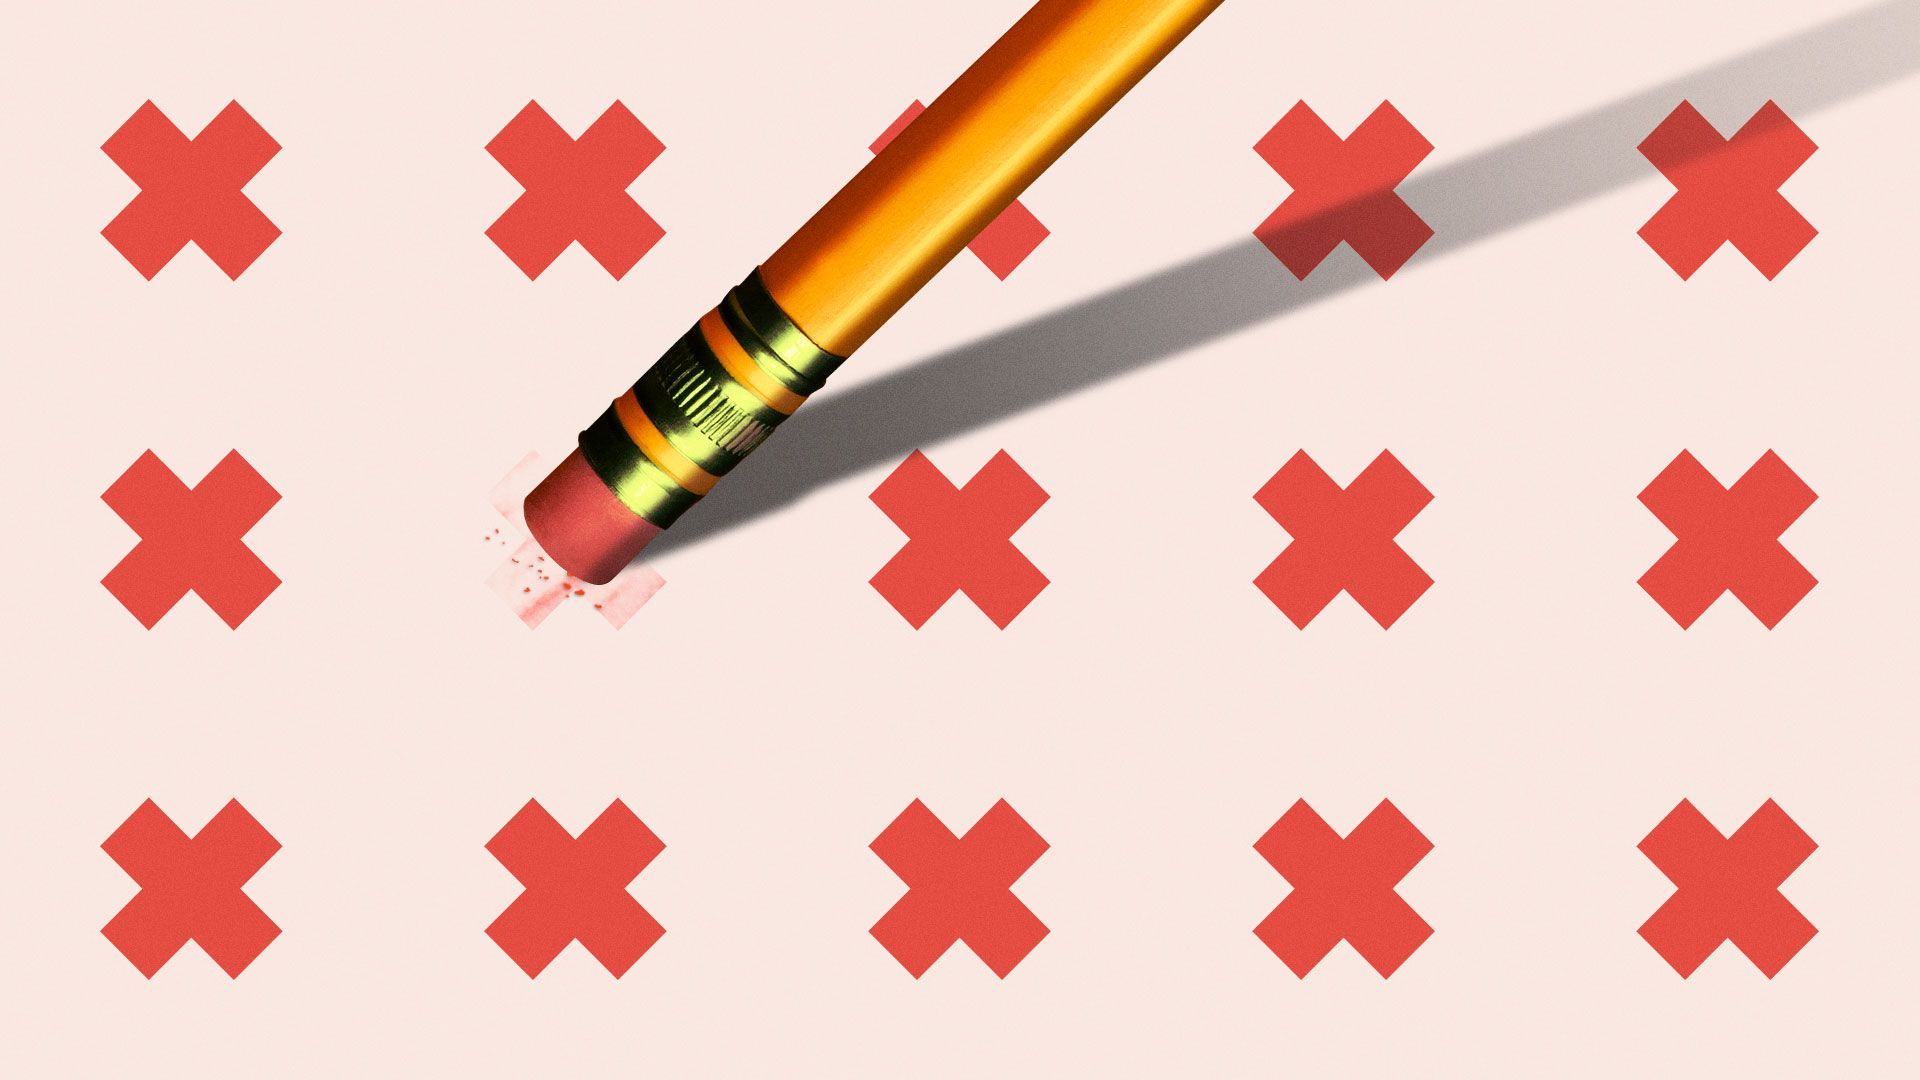 Illustration of a pencil erasing one X from a pattern of Xs